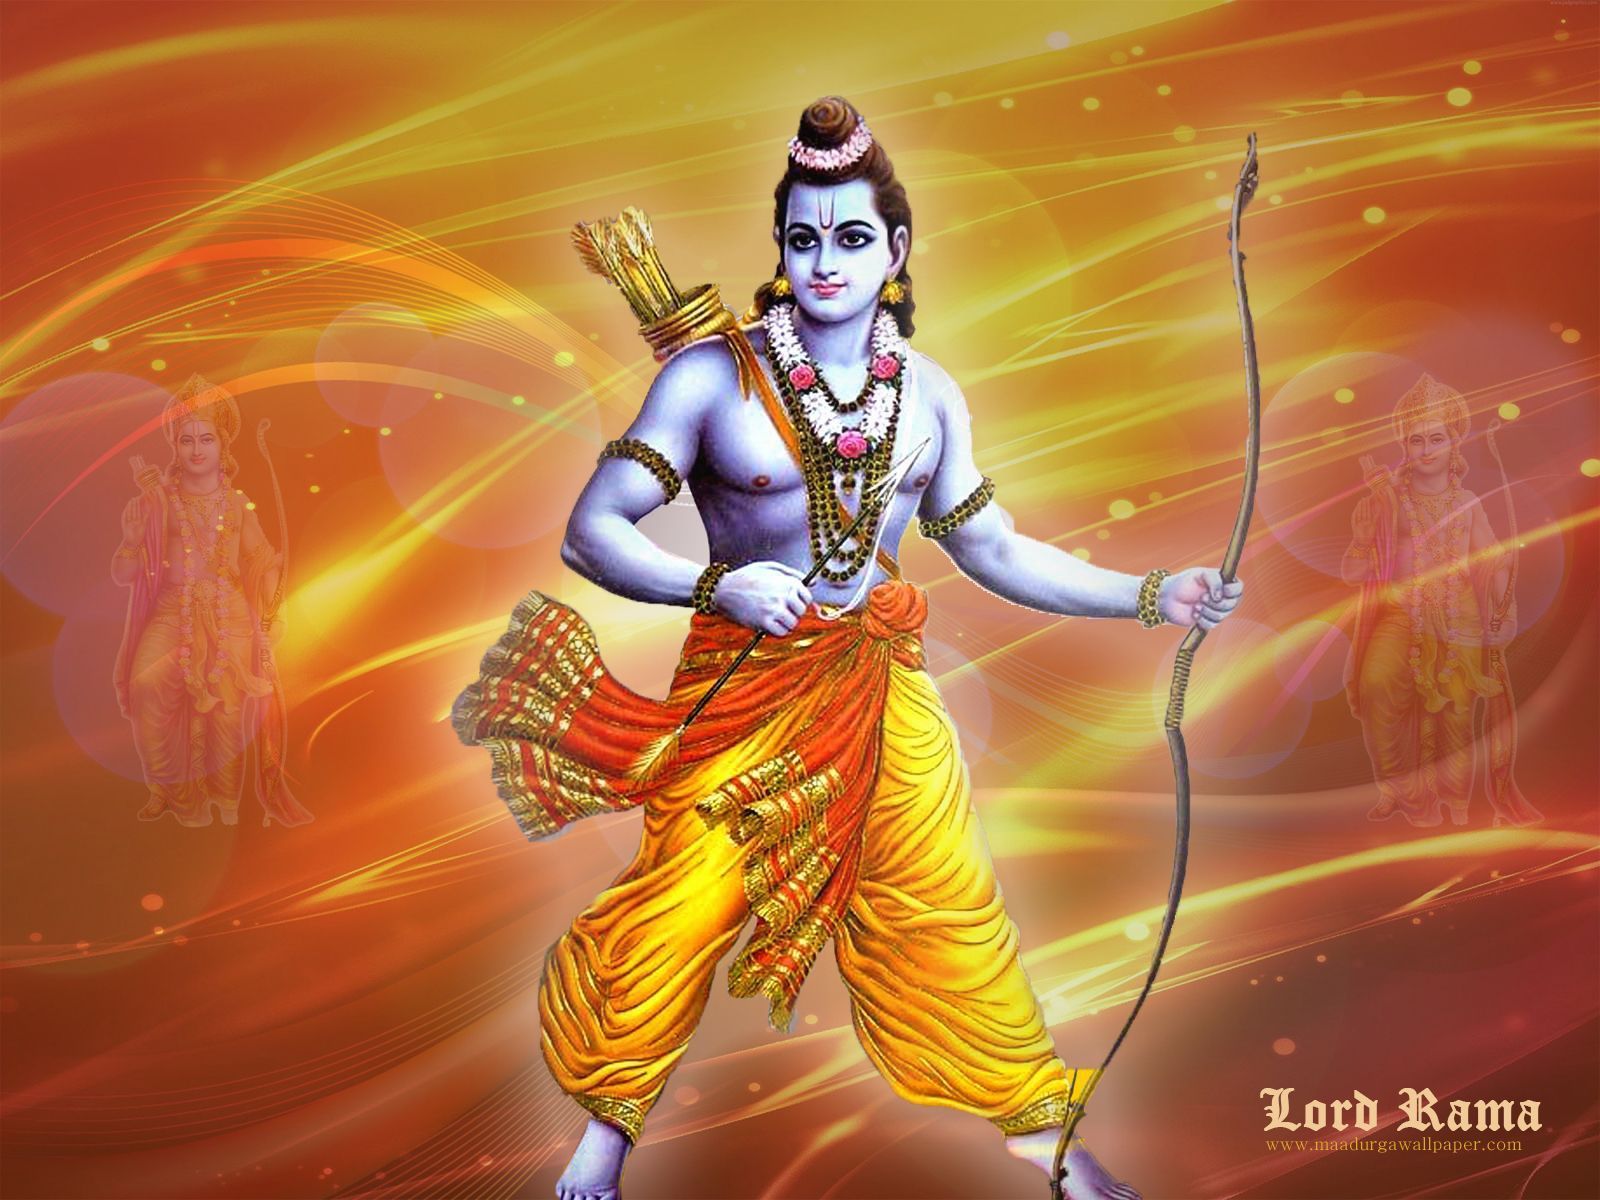 Incredible Compilation of 4K Full HD Images of Angry Shri Ram, Exceeding  999+